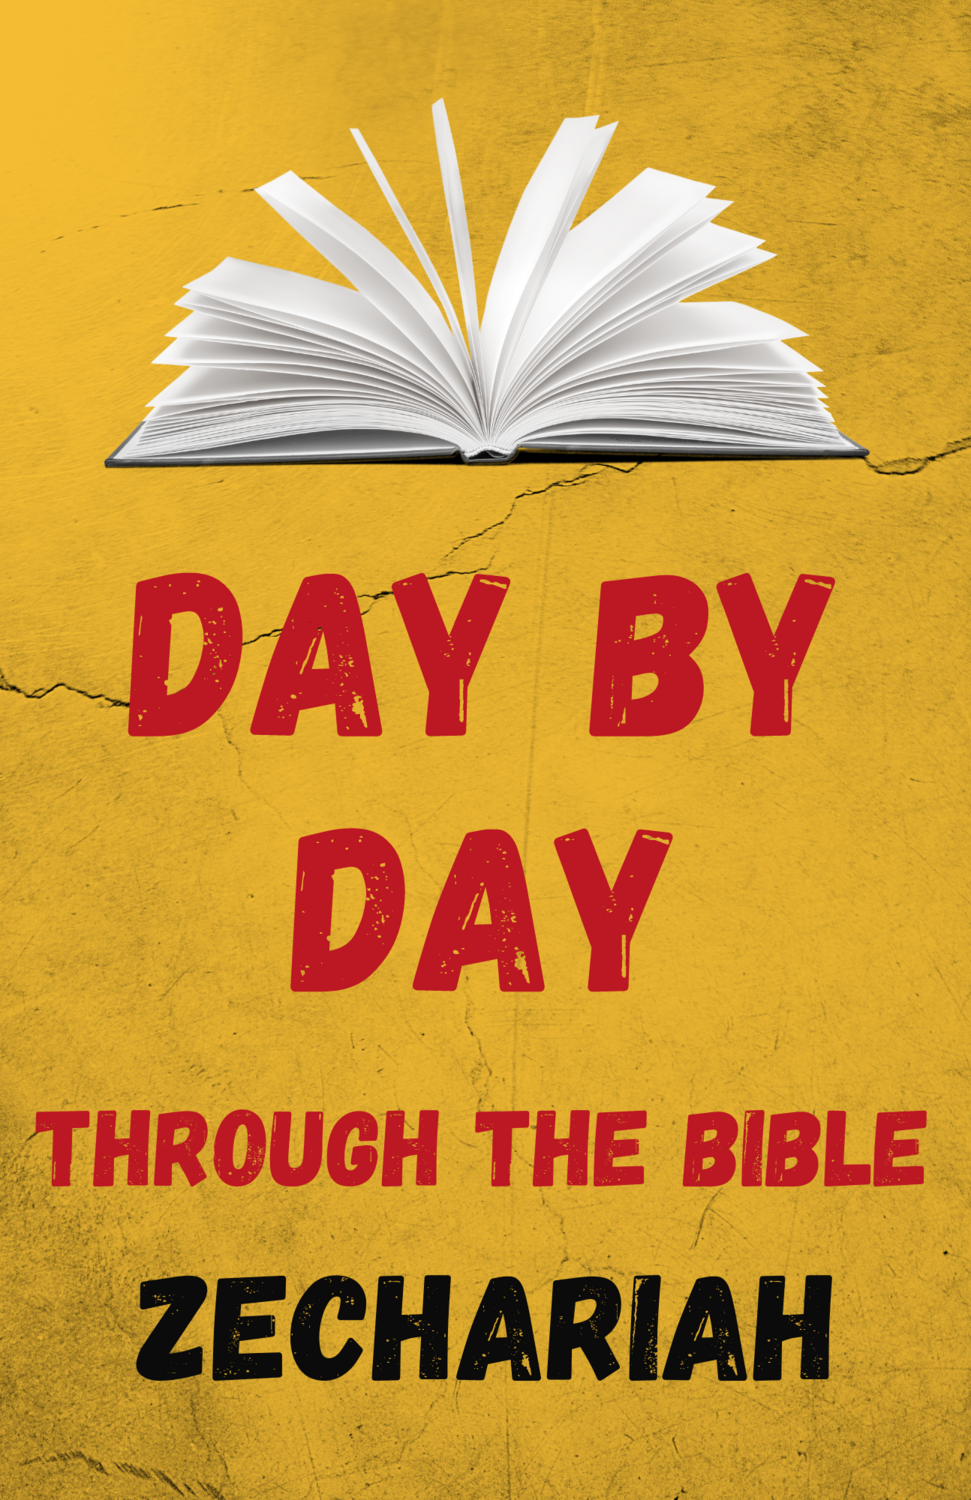 Day by Day Through the Bible: Fourteen Days in Zechariah - Digital Download